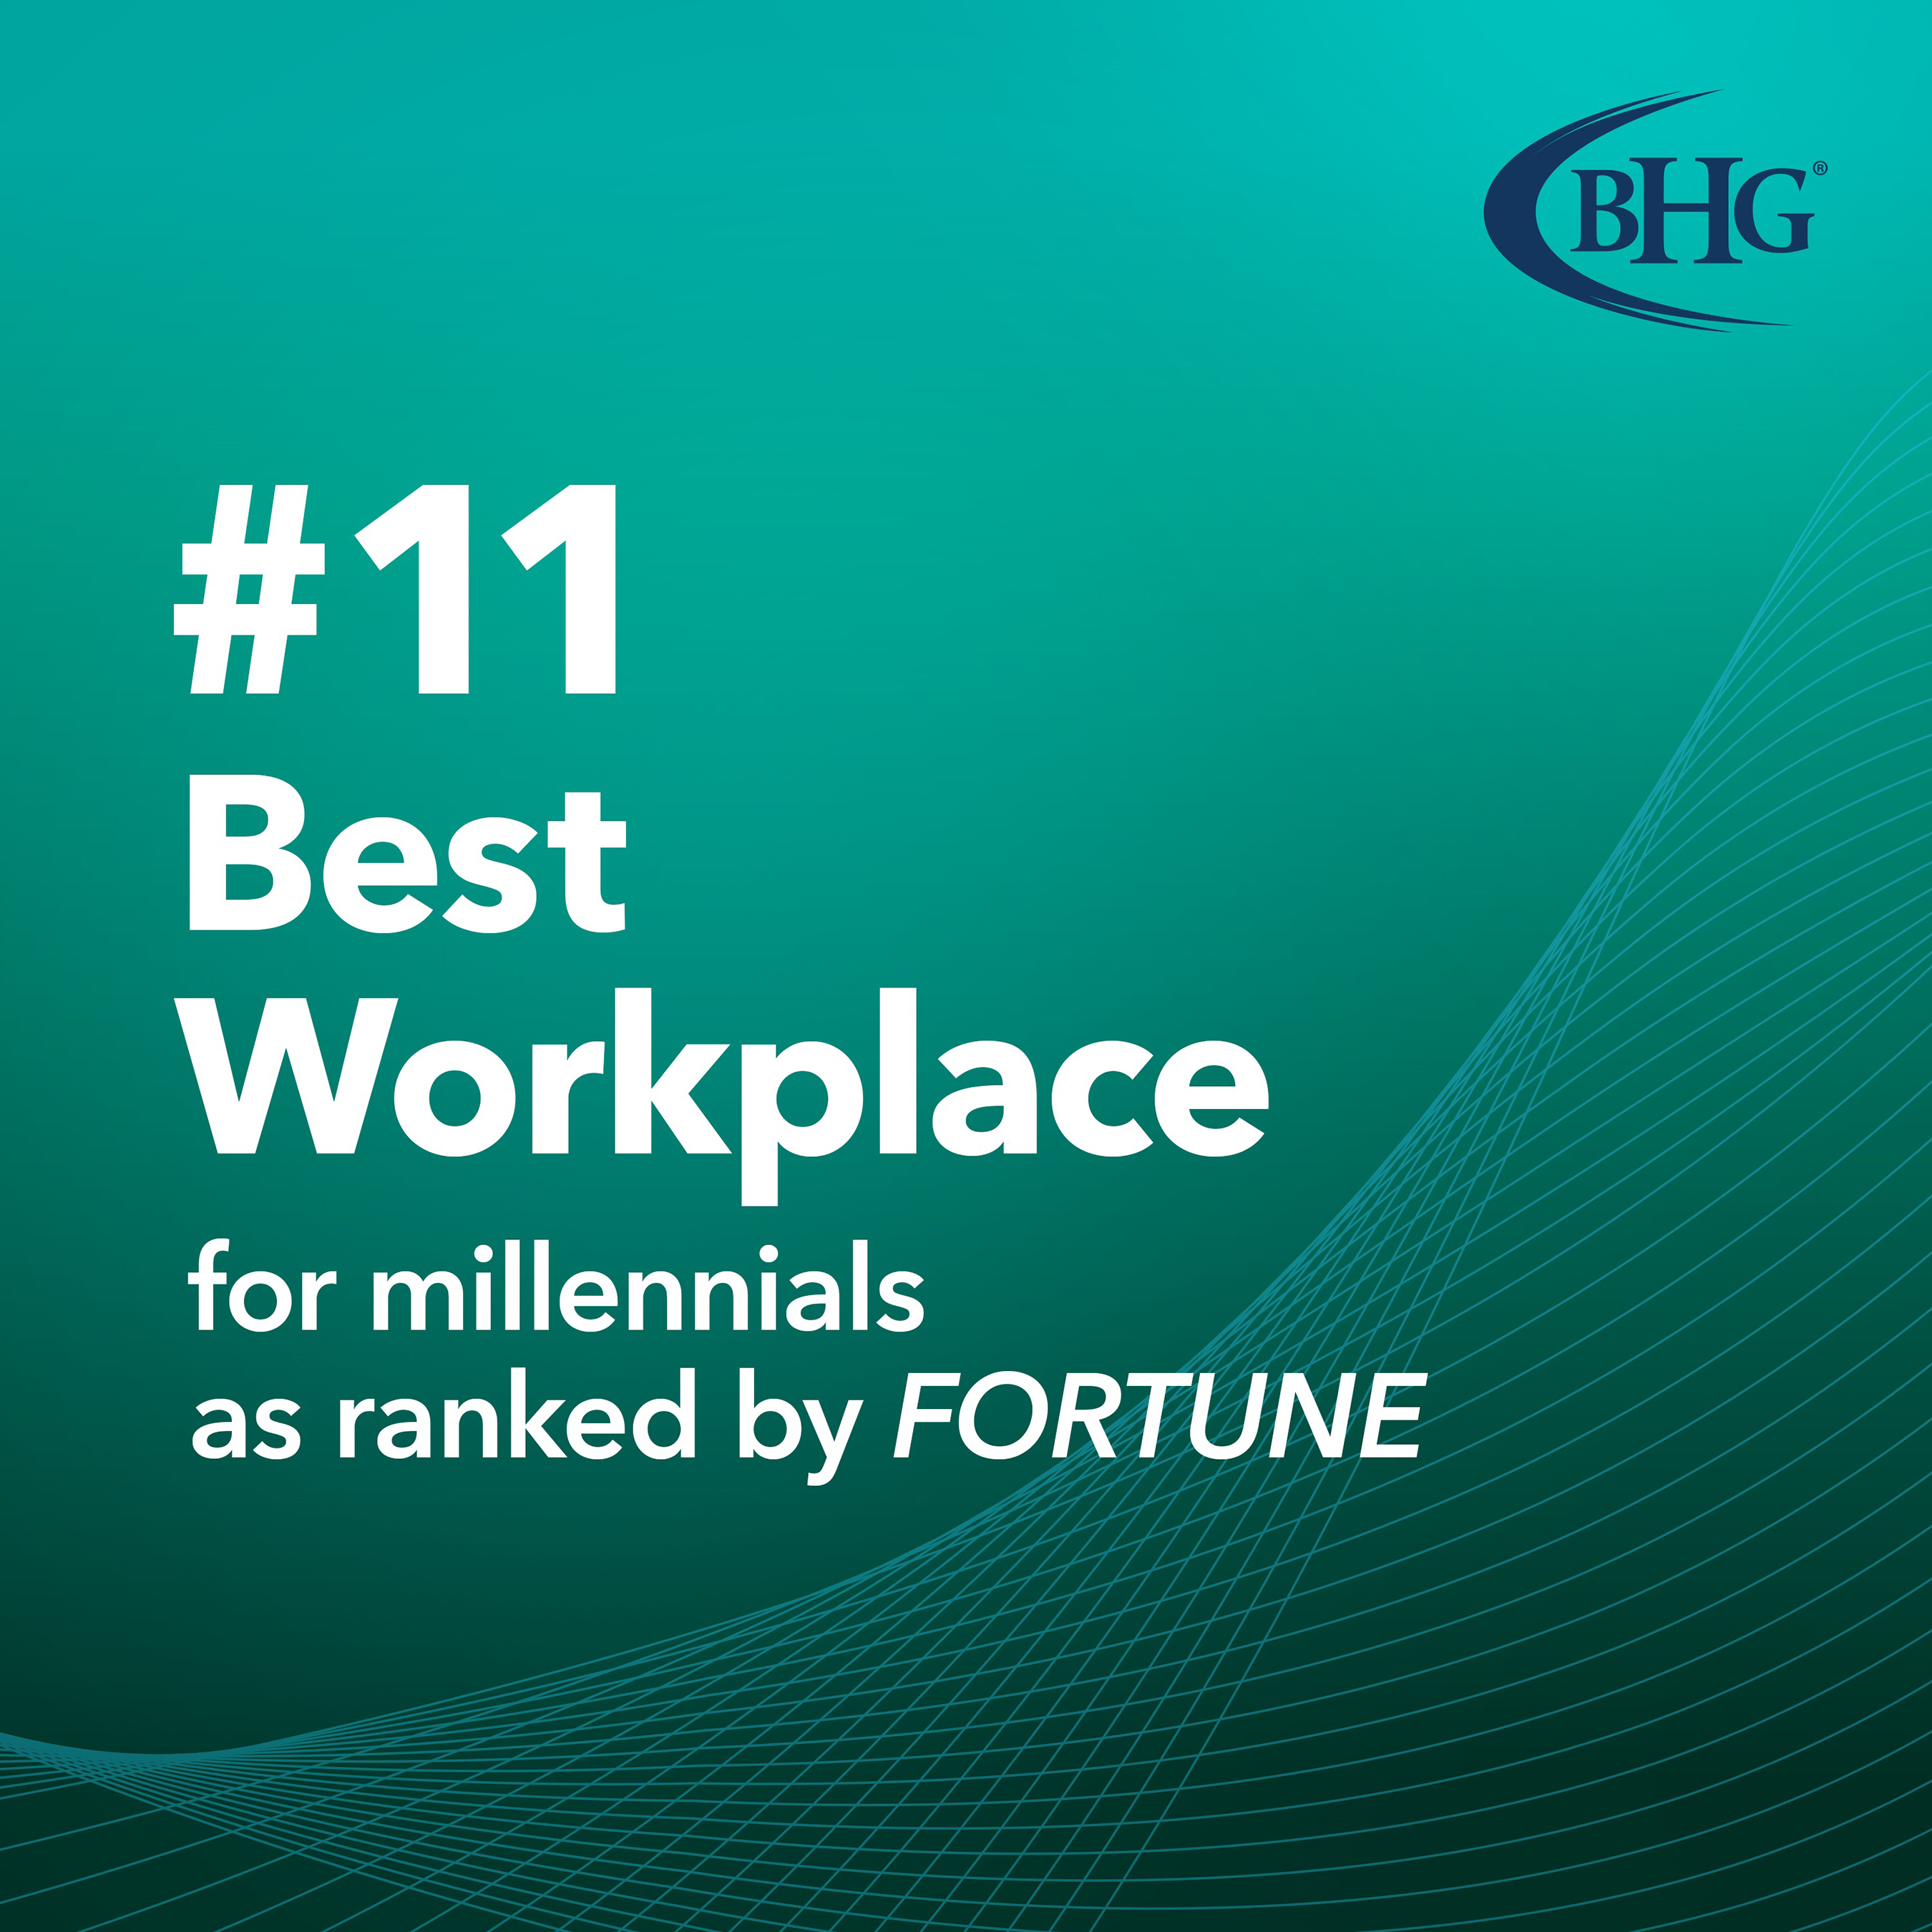 BHG Named One of the Nation's Best Workplaces for Millennials by Fortune Magazine and Great Places to Work®